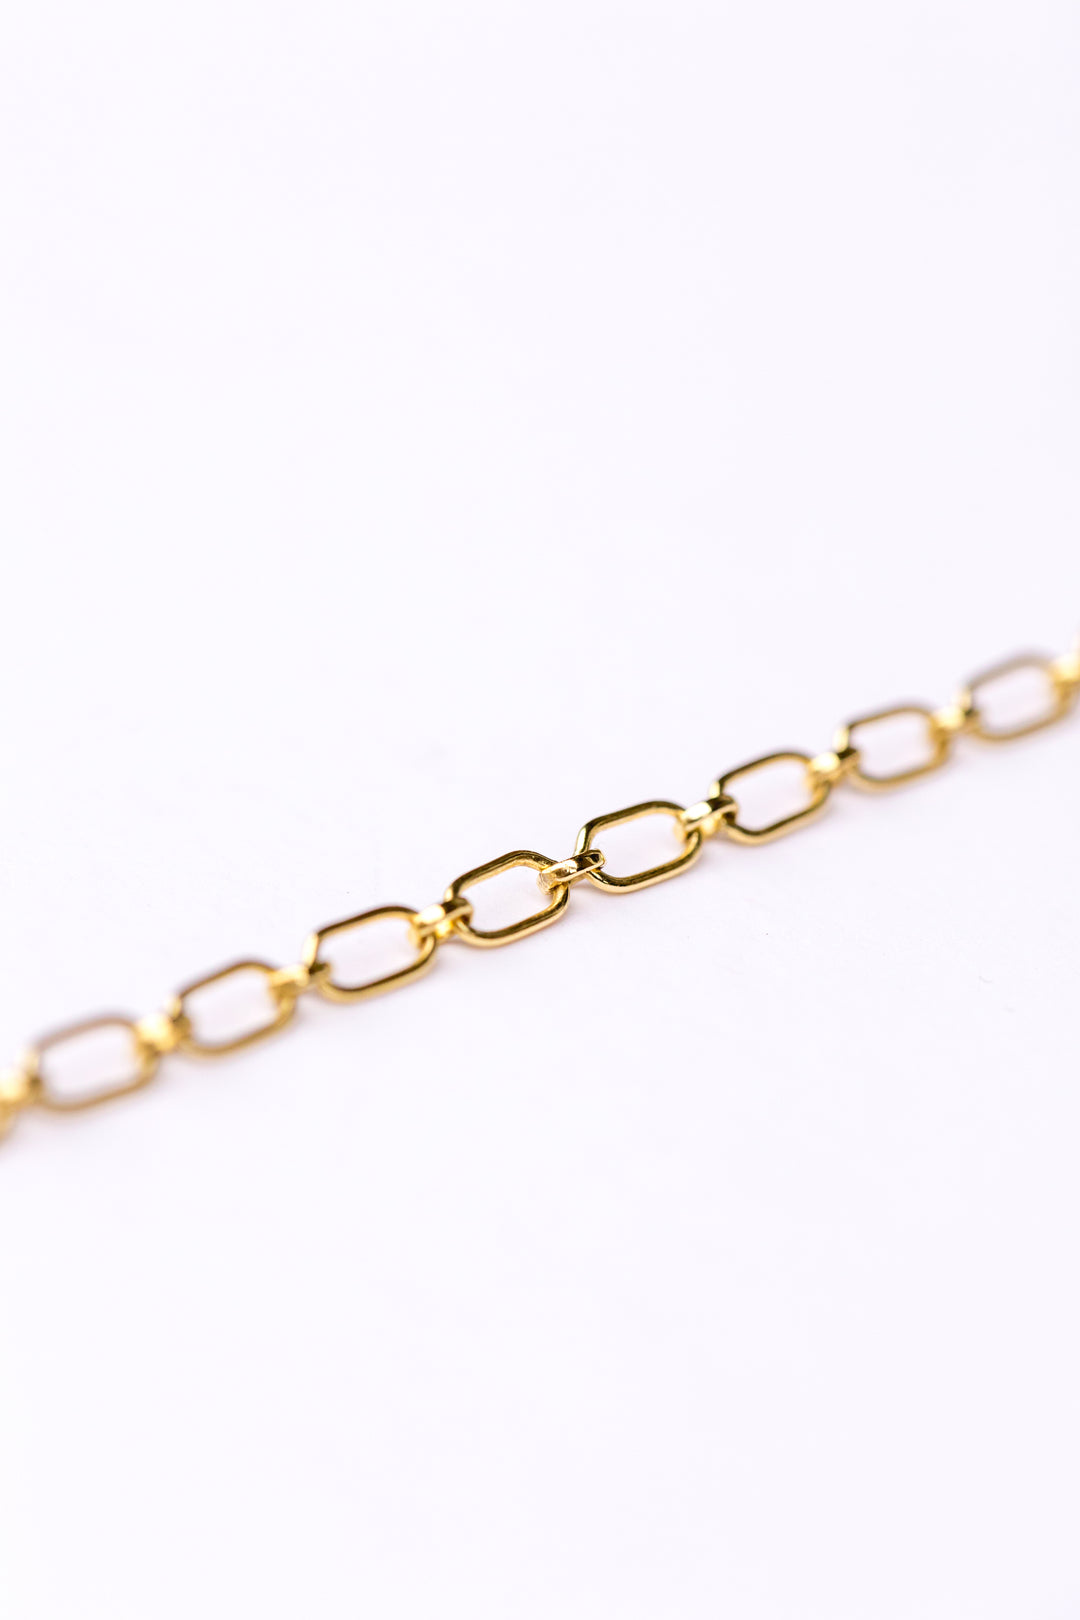 Gold Delicate Chain Necklace by Anna Shae Jewelry in Lexington, Kentucky 